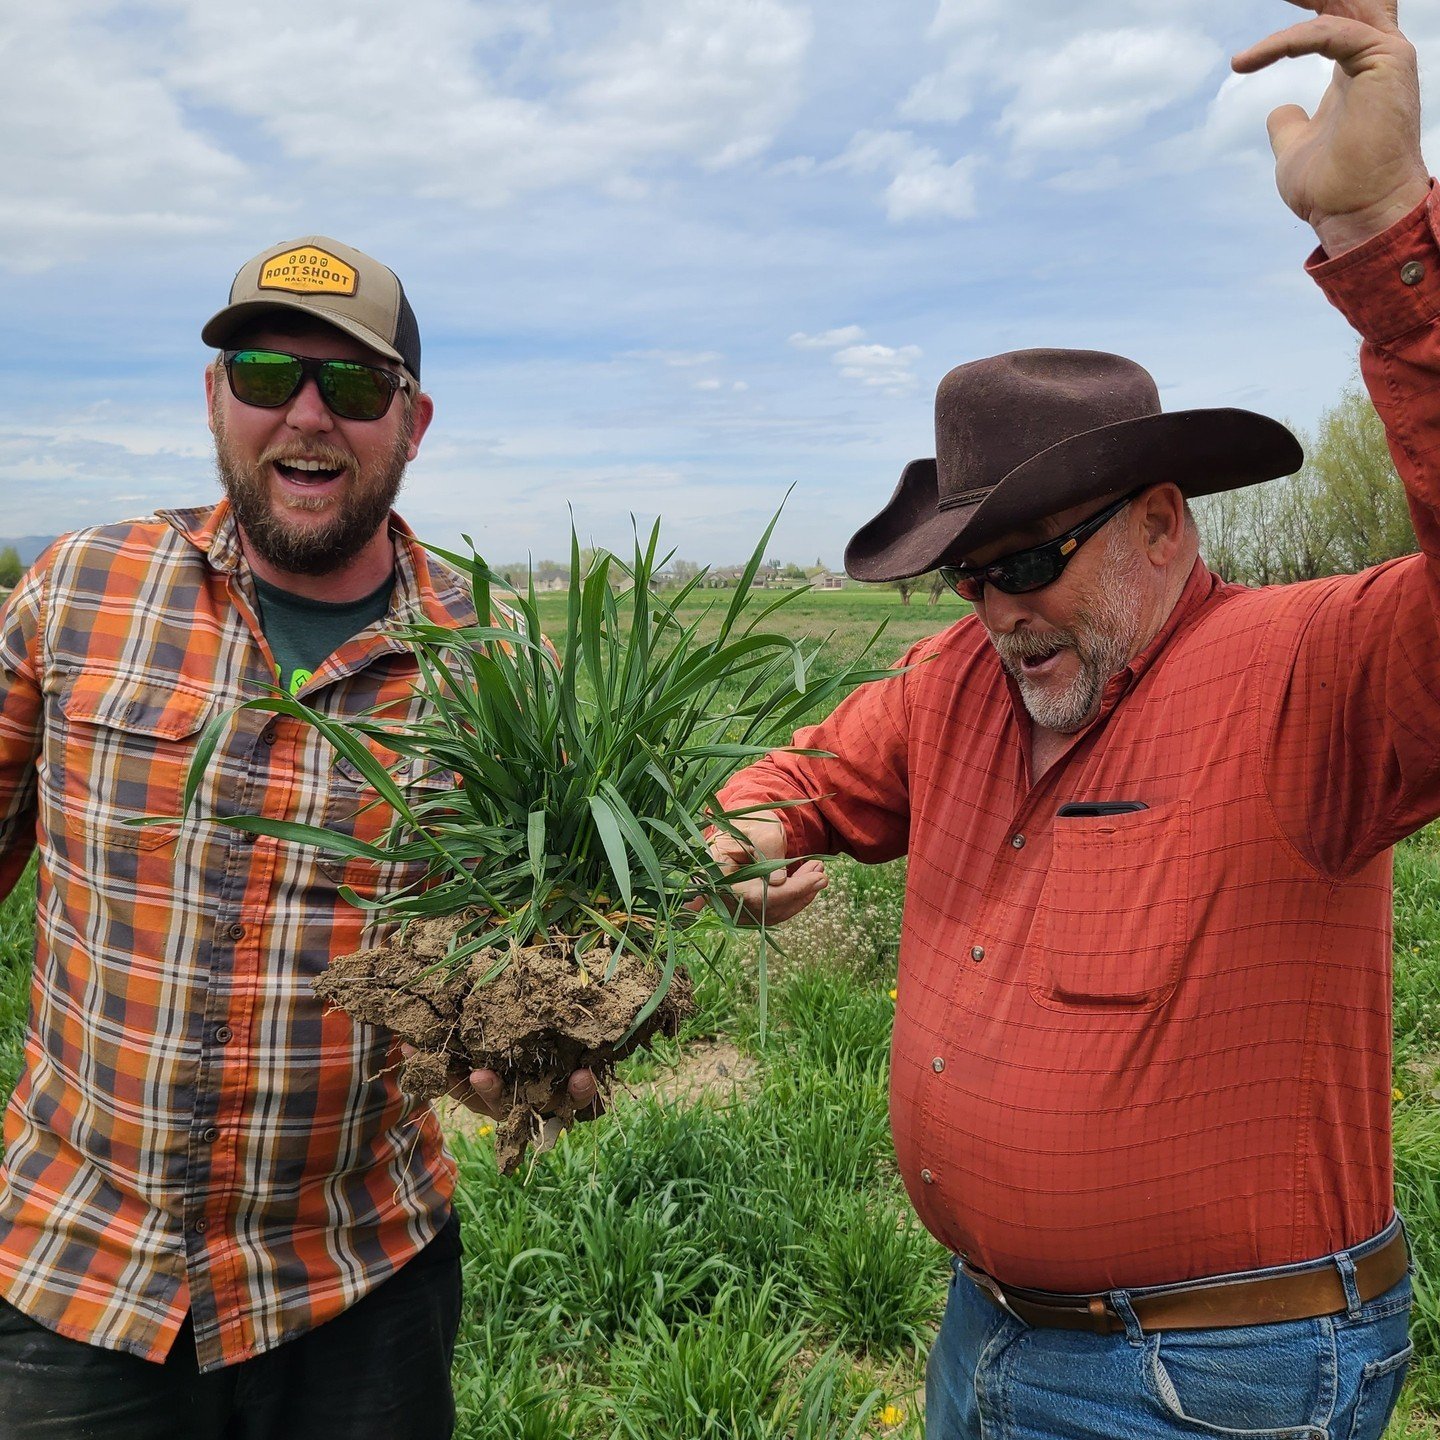 🎉Farmer Todd and Beefy Steve are stoked about our Kernza crop this year! 

🌾An intermediate wheatgrass, the roots are said to reach 10 feet deep delivering atmospheric carbon to the soil and efficiently taking up nutrients and water.

🐄We're hopin